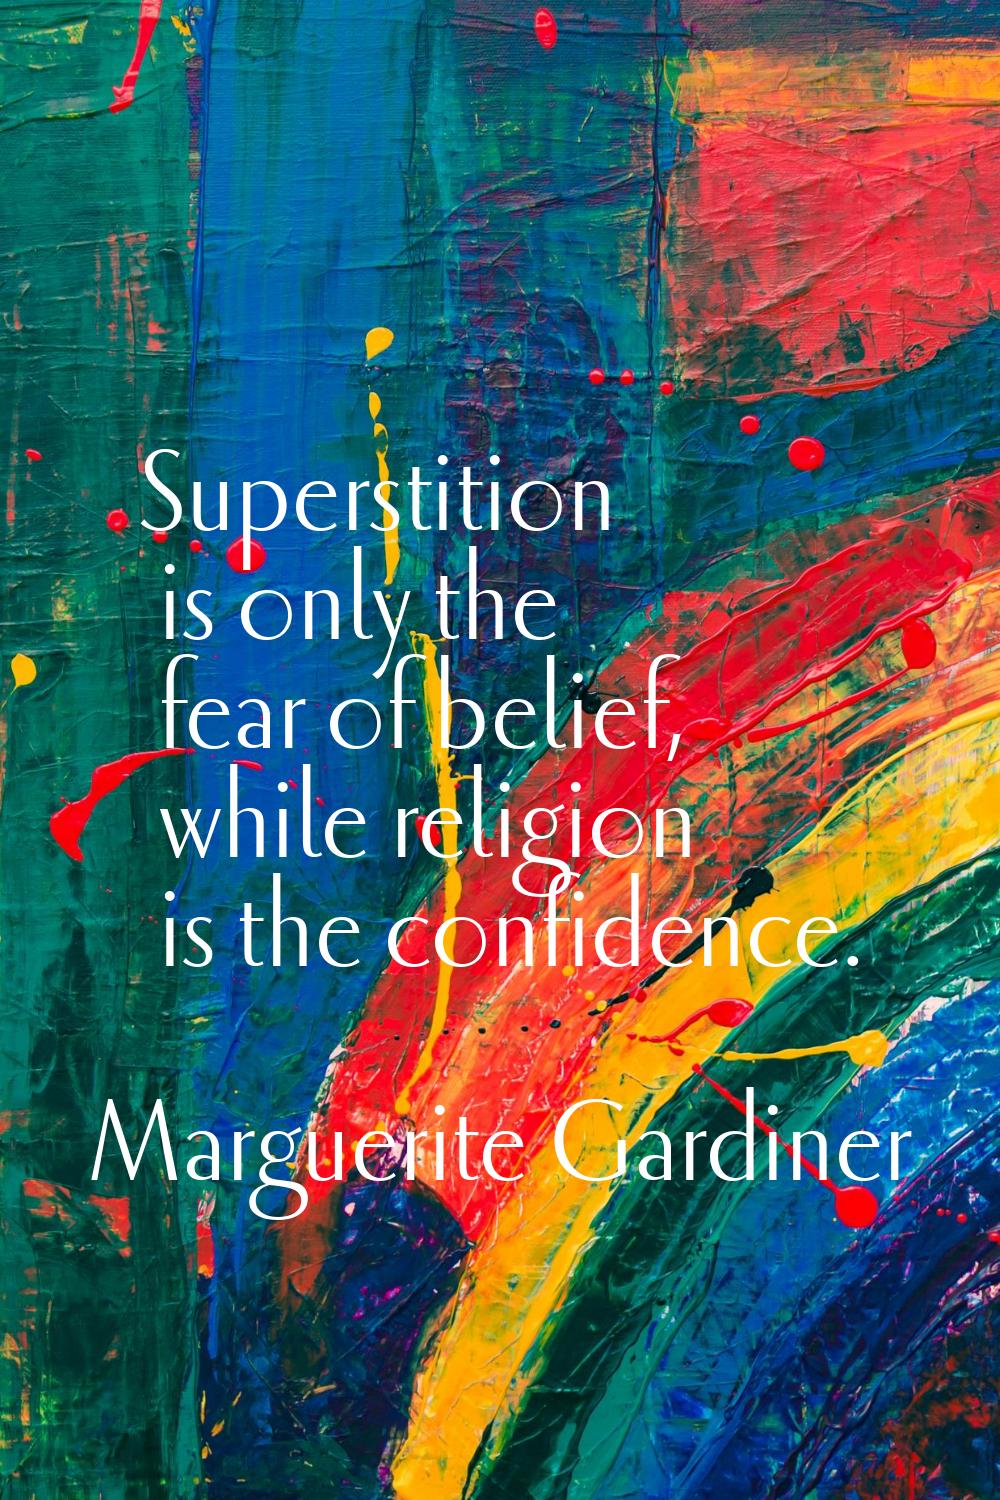 Superstition is only the fear of belief, while religion is the confidence.